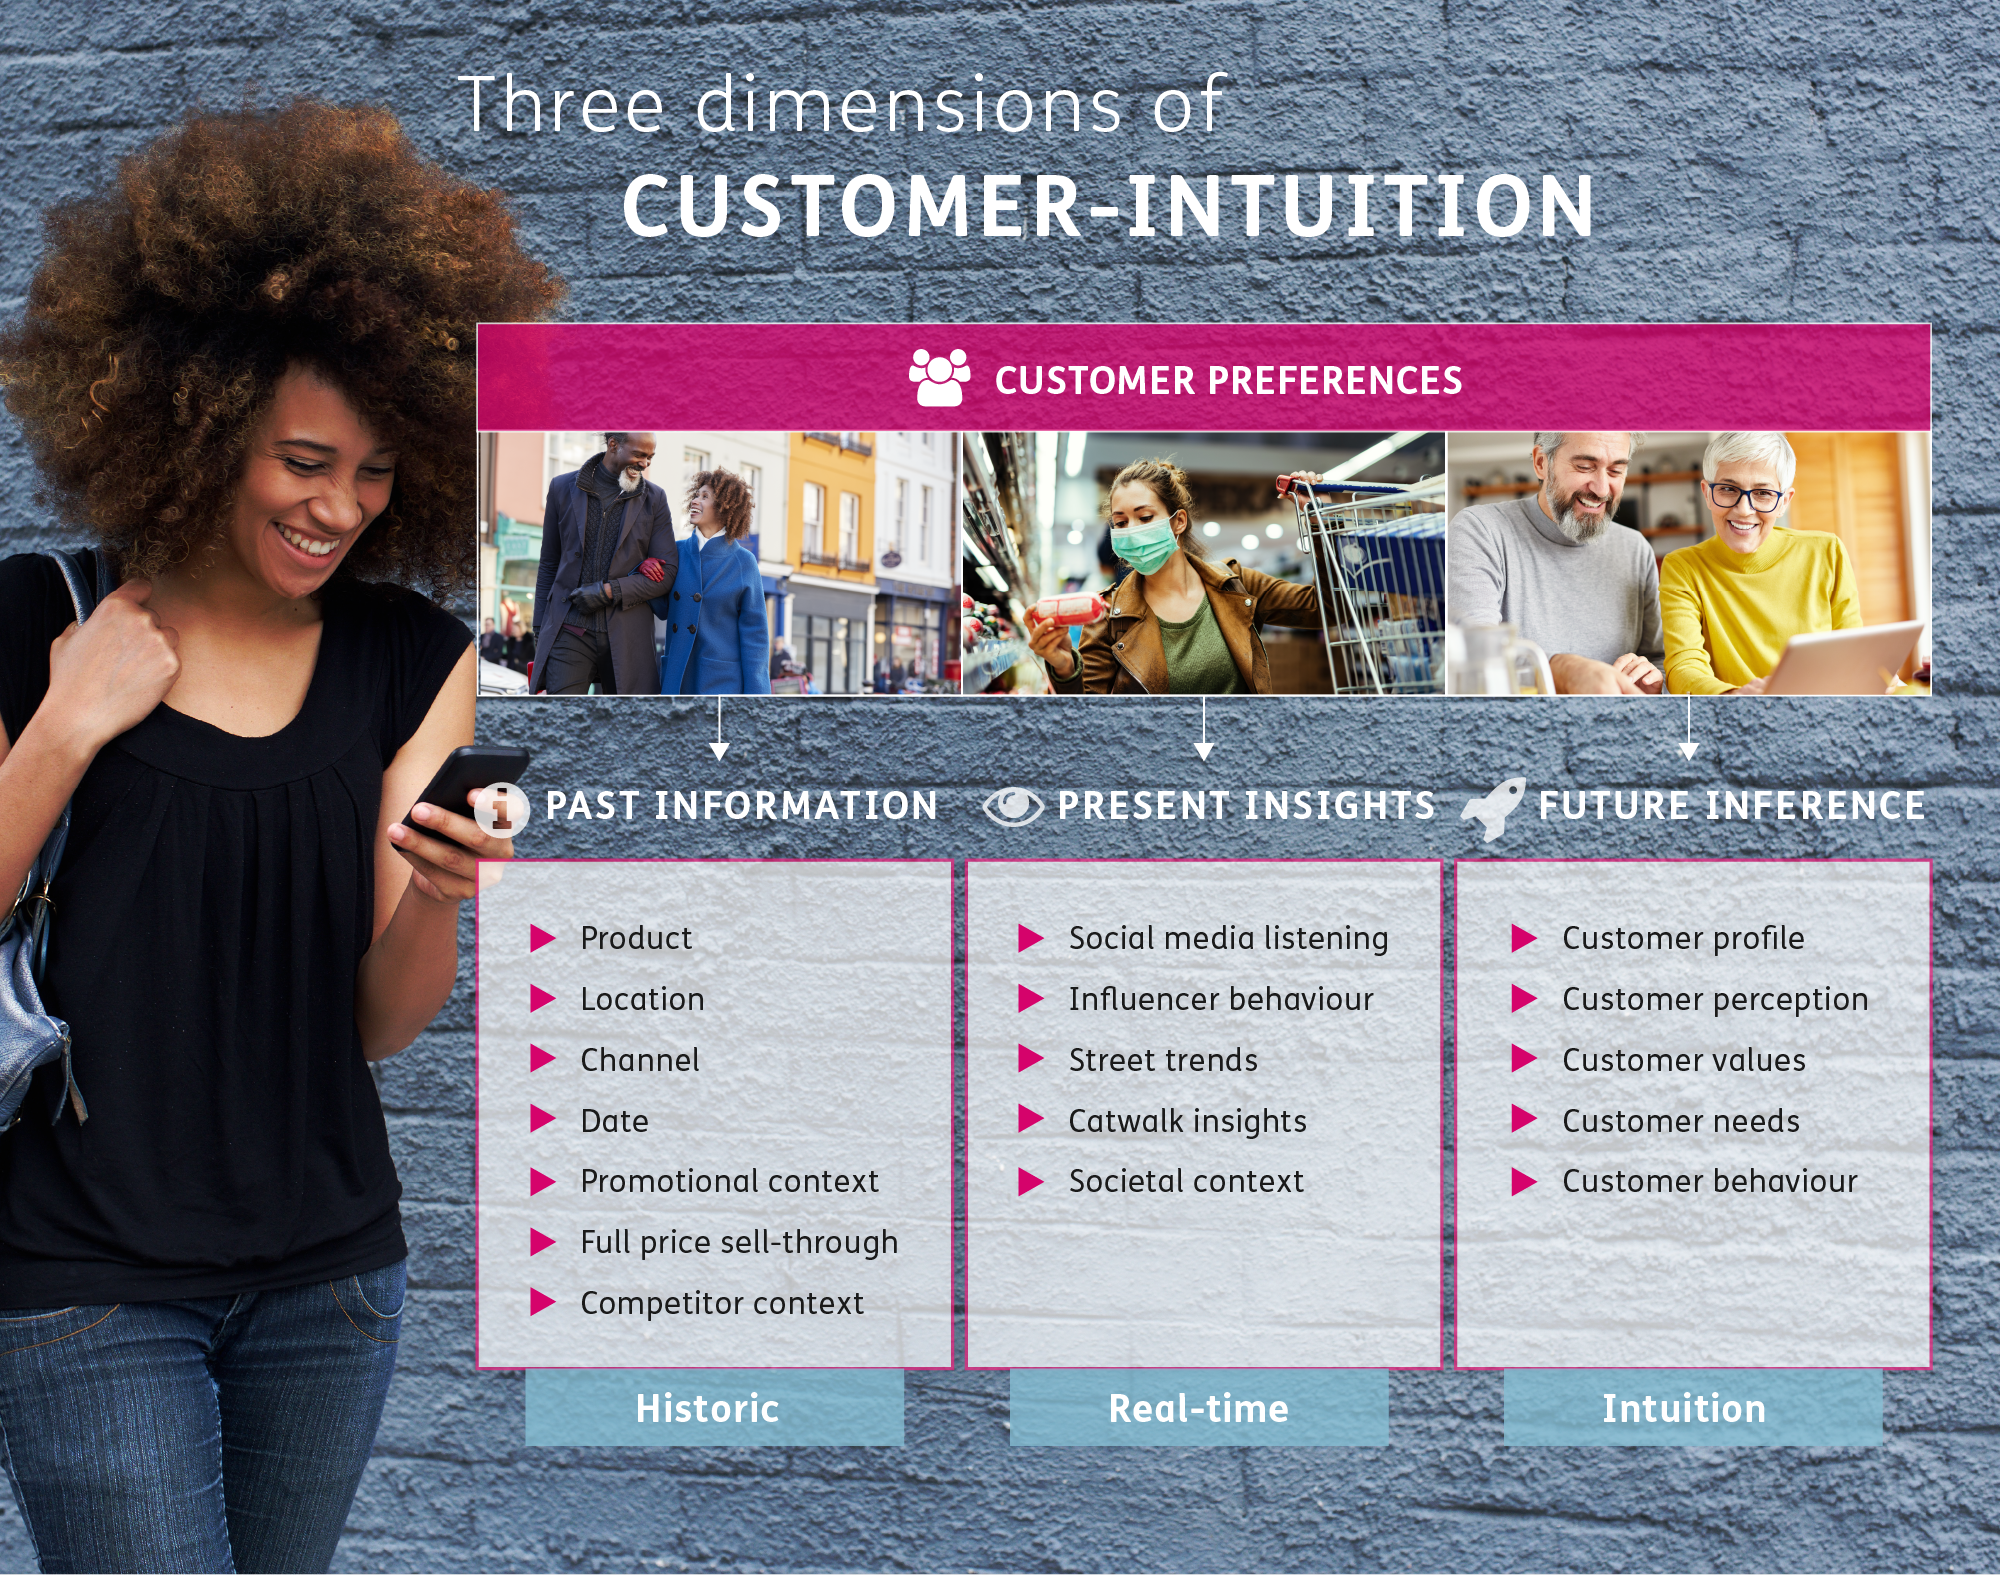 Three dimensions of customer intuition: past information, present insights and future inferences